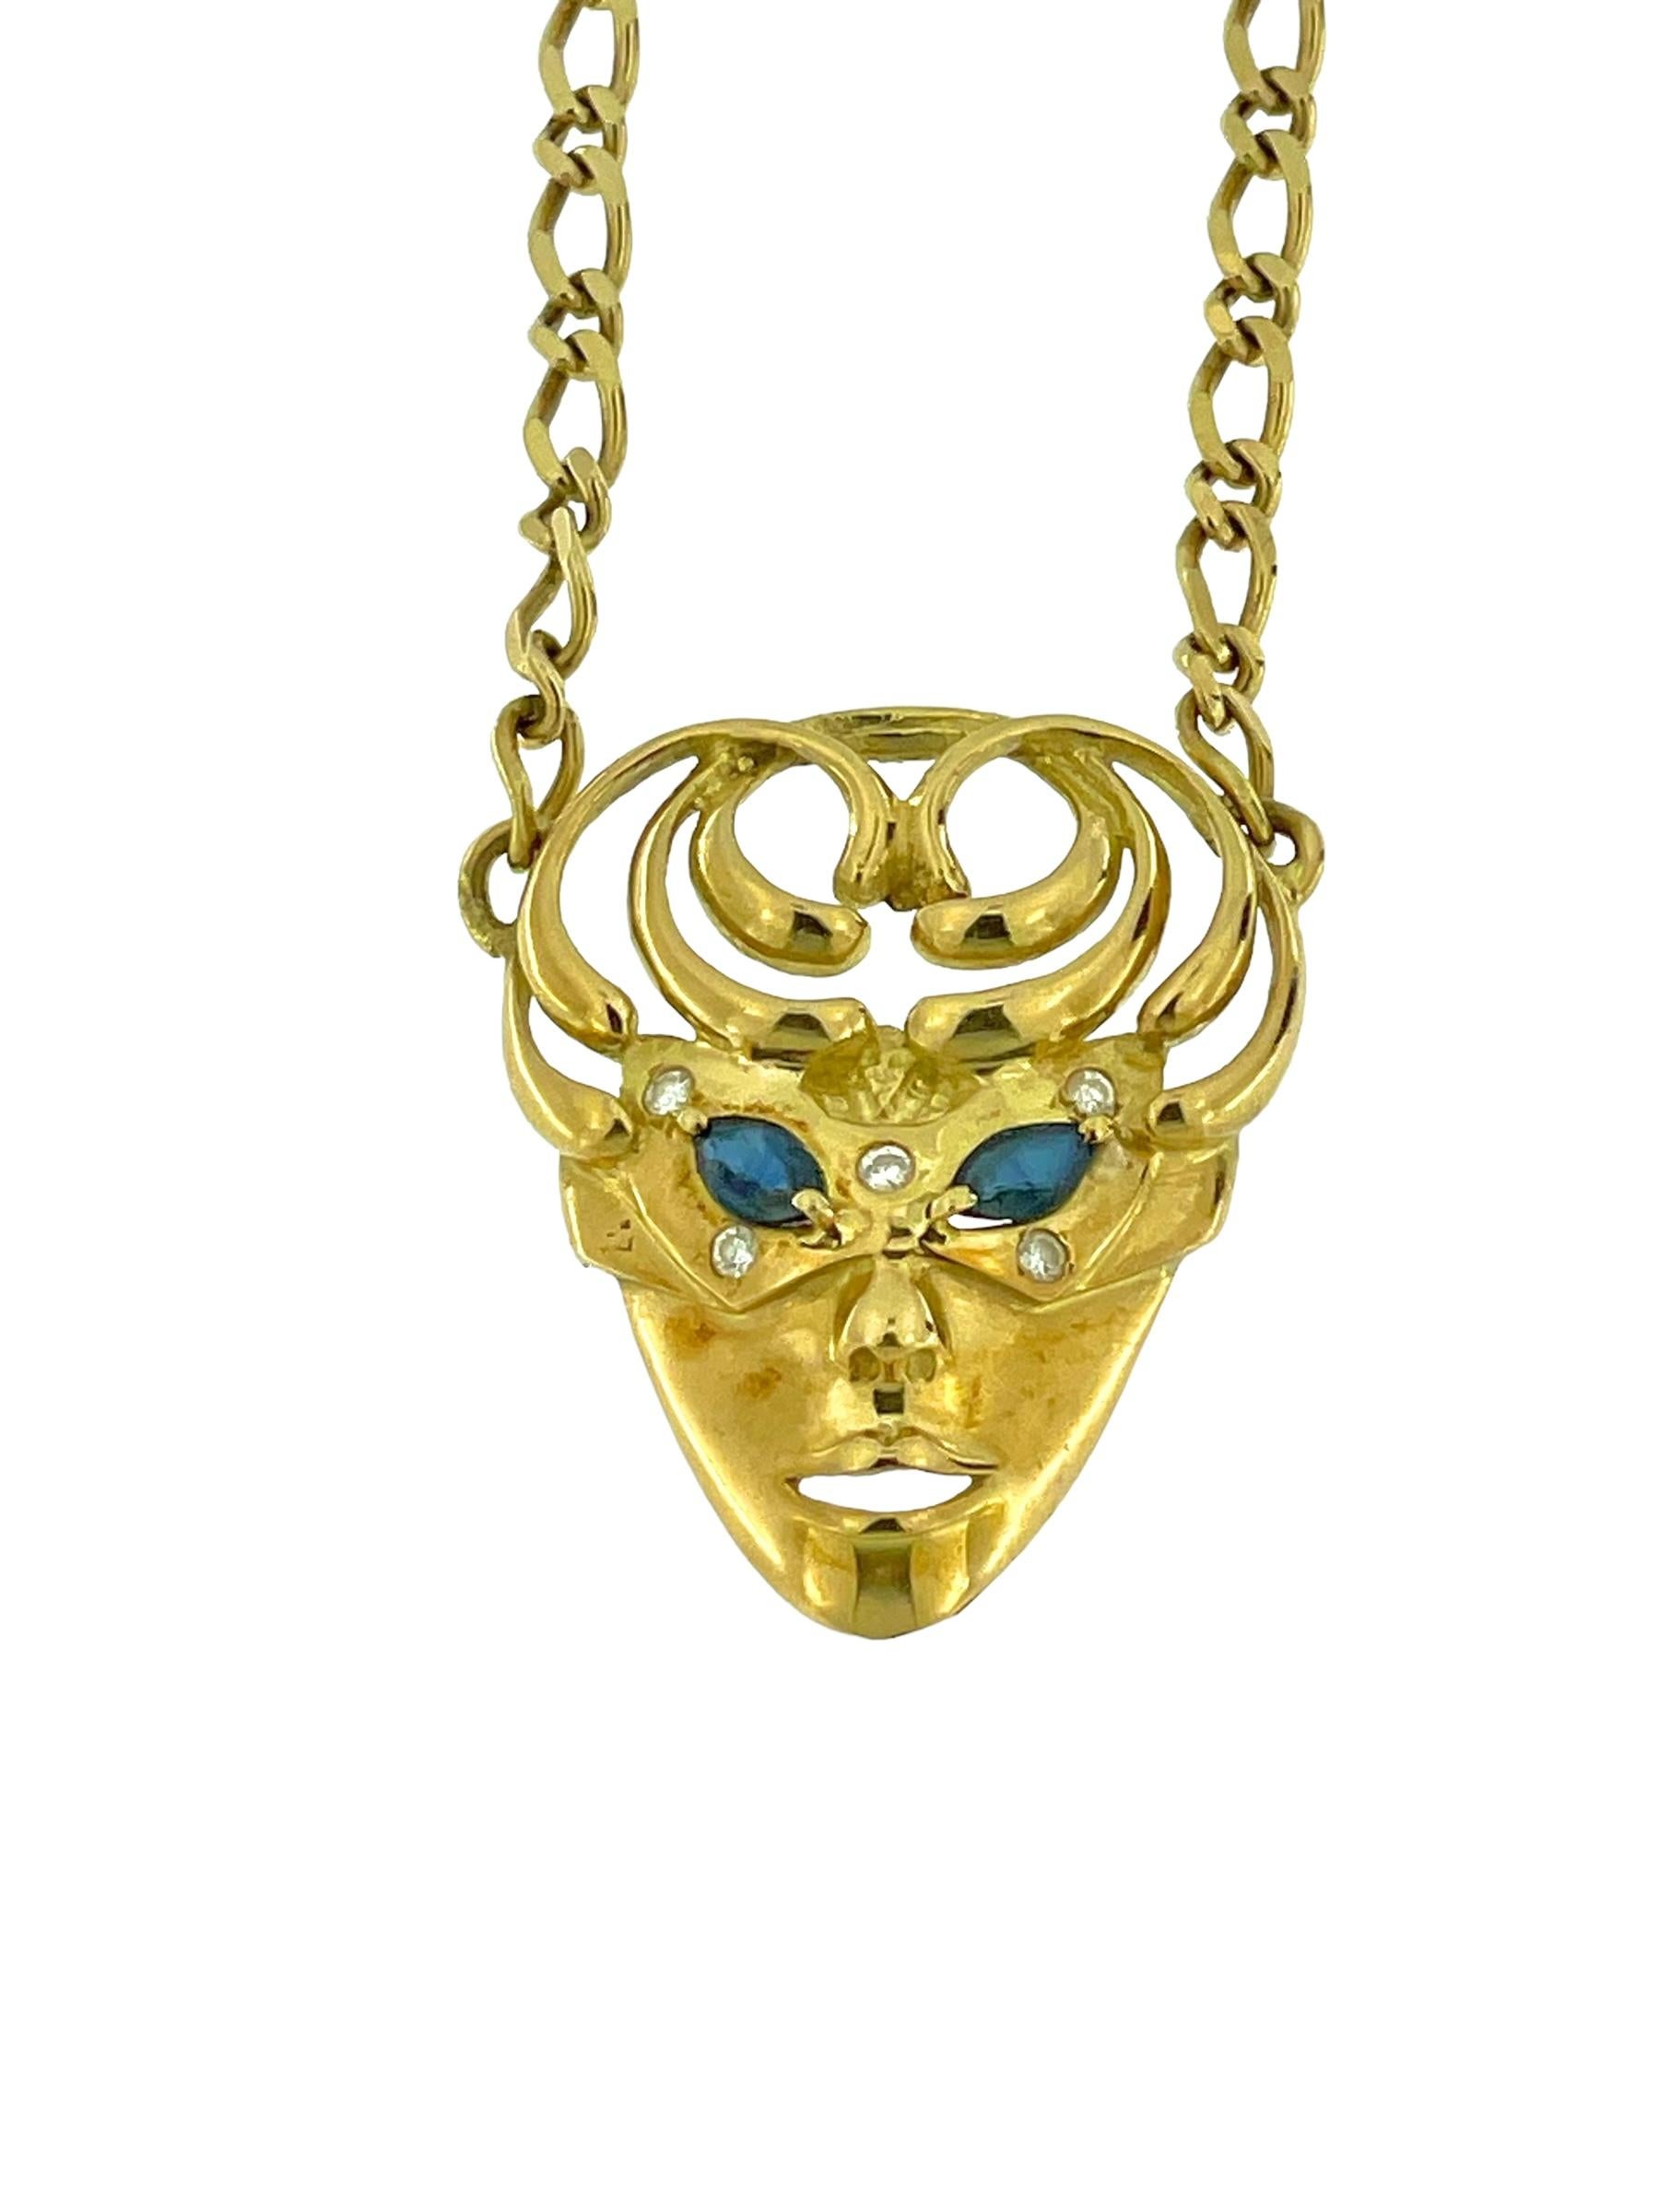 The Italian Necklace with Venetian Mask Pendant is a captivating piece of jewelry that beautifully merges Italian craftsmanship with Venetian charm. Crafted from 18-karat yellow gold, this necklace features a stunning Venetian mask pendant adorned